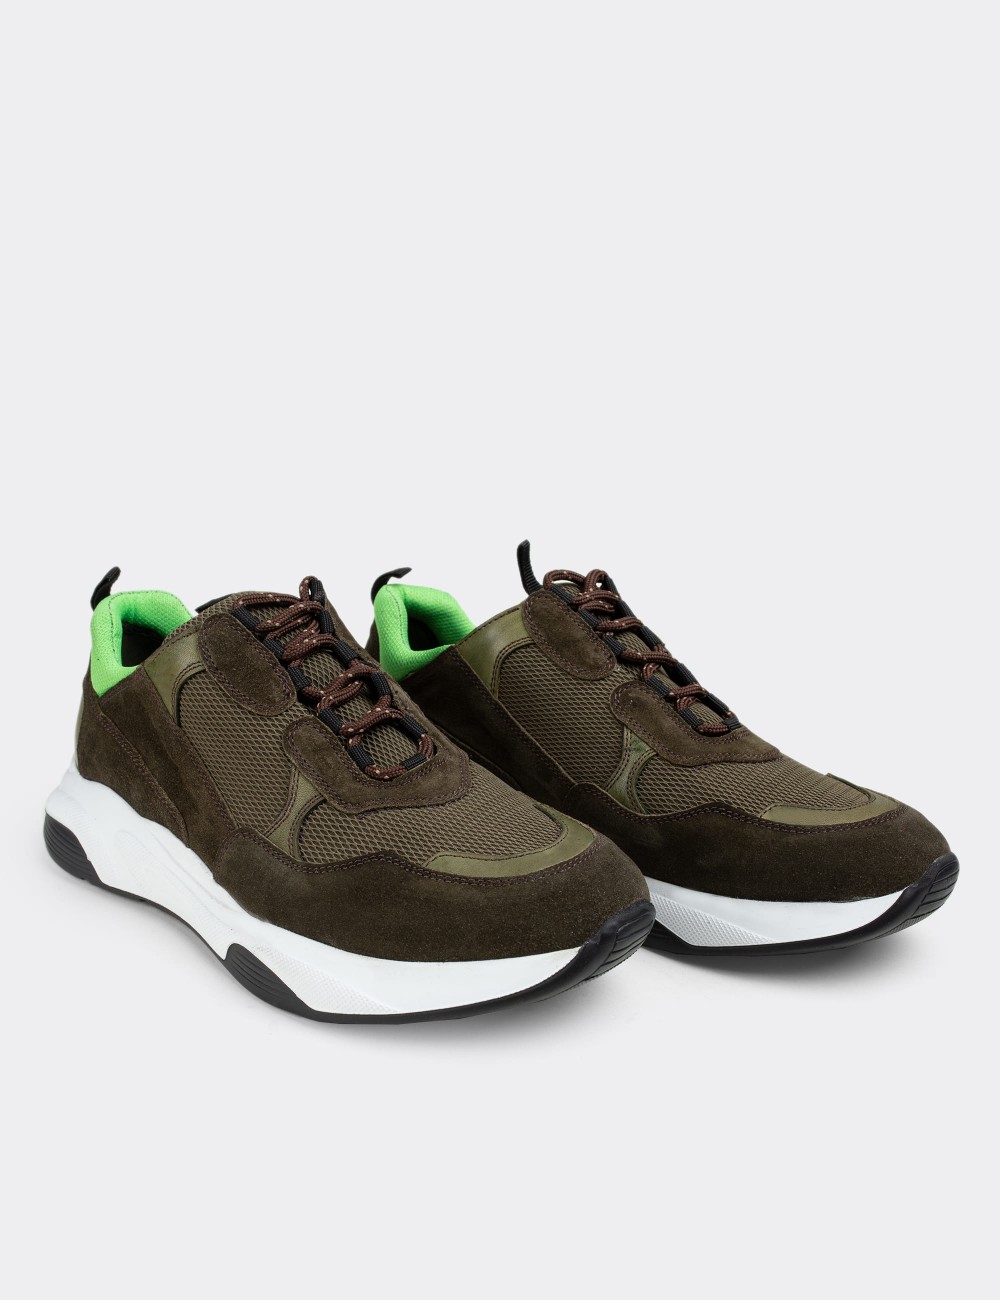 Green Suede Leather Sneakers - 01724MYSLE02